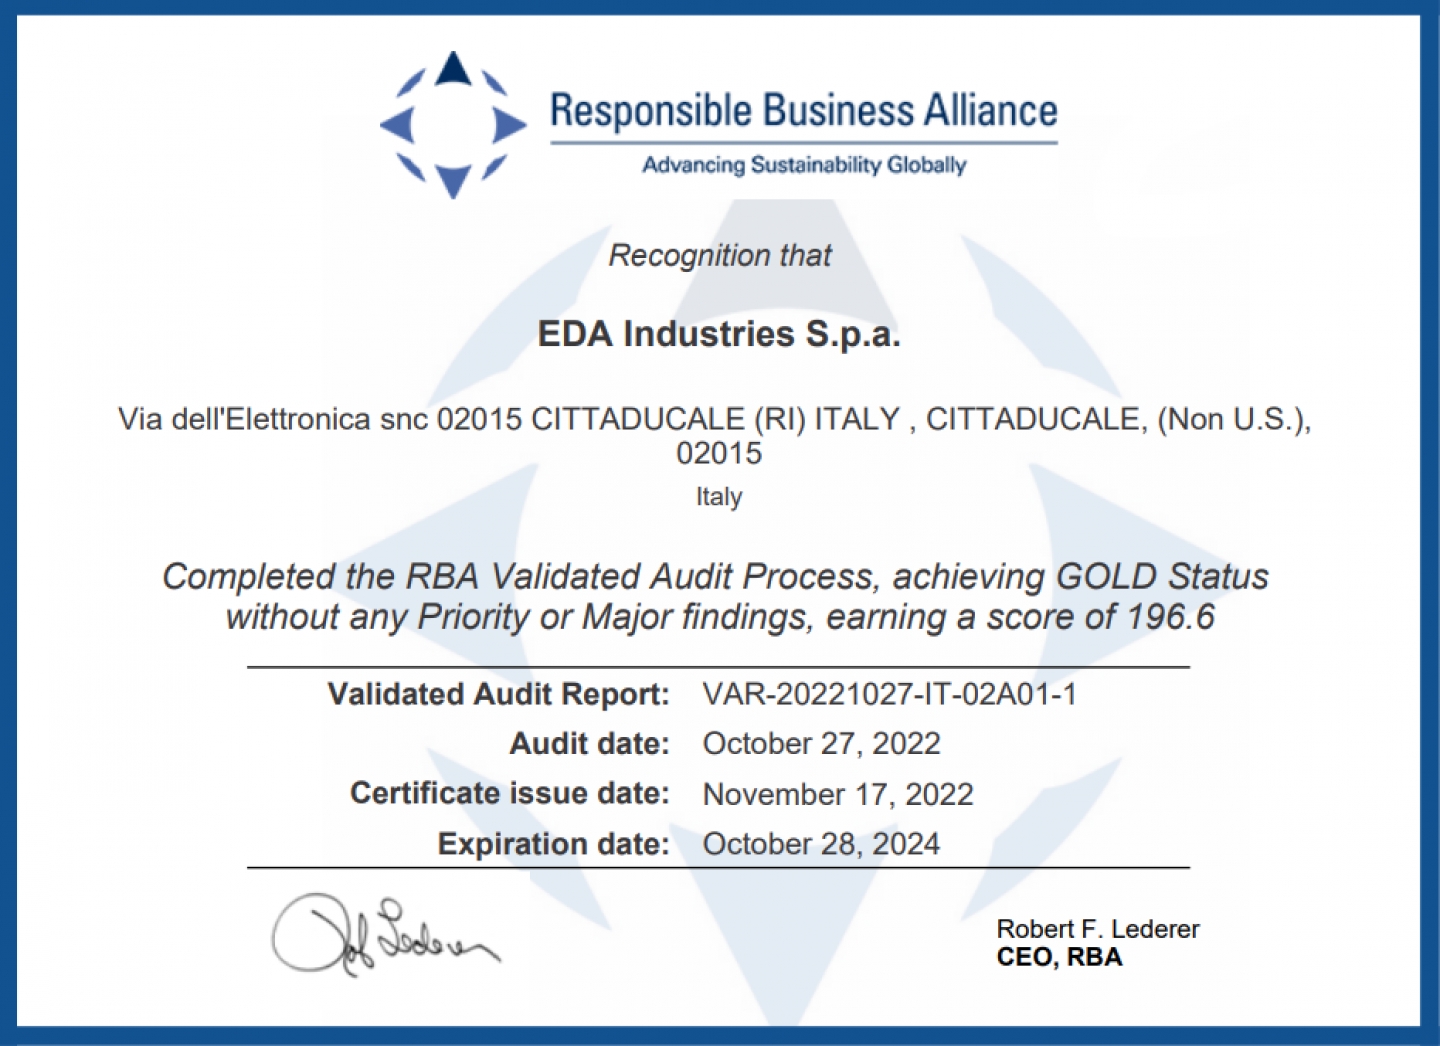 RBA Certification: EDA S.P.A has obtained the GOLD Status